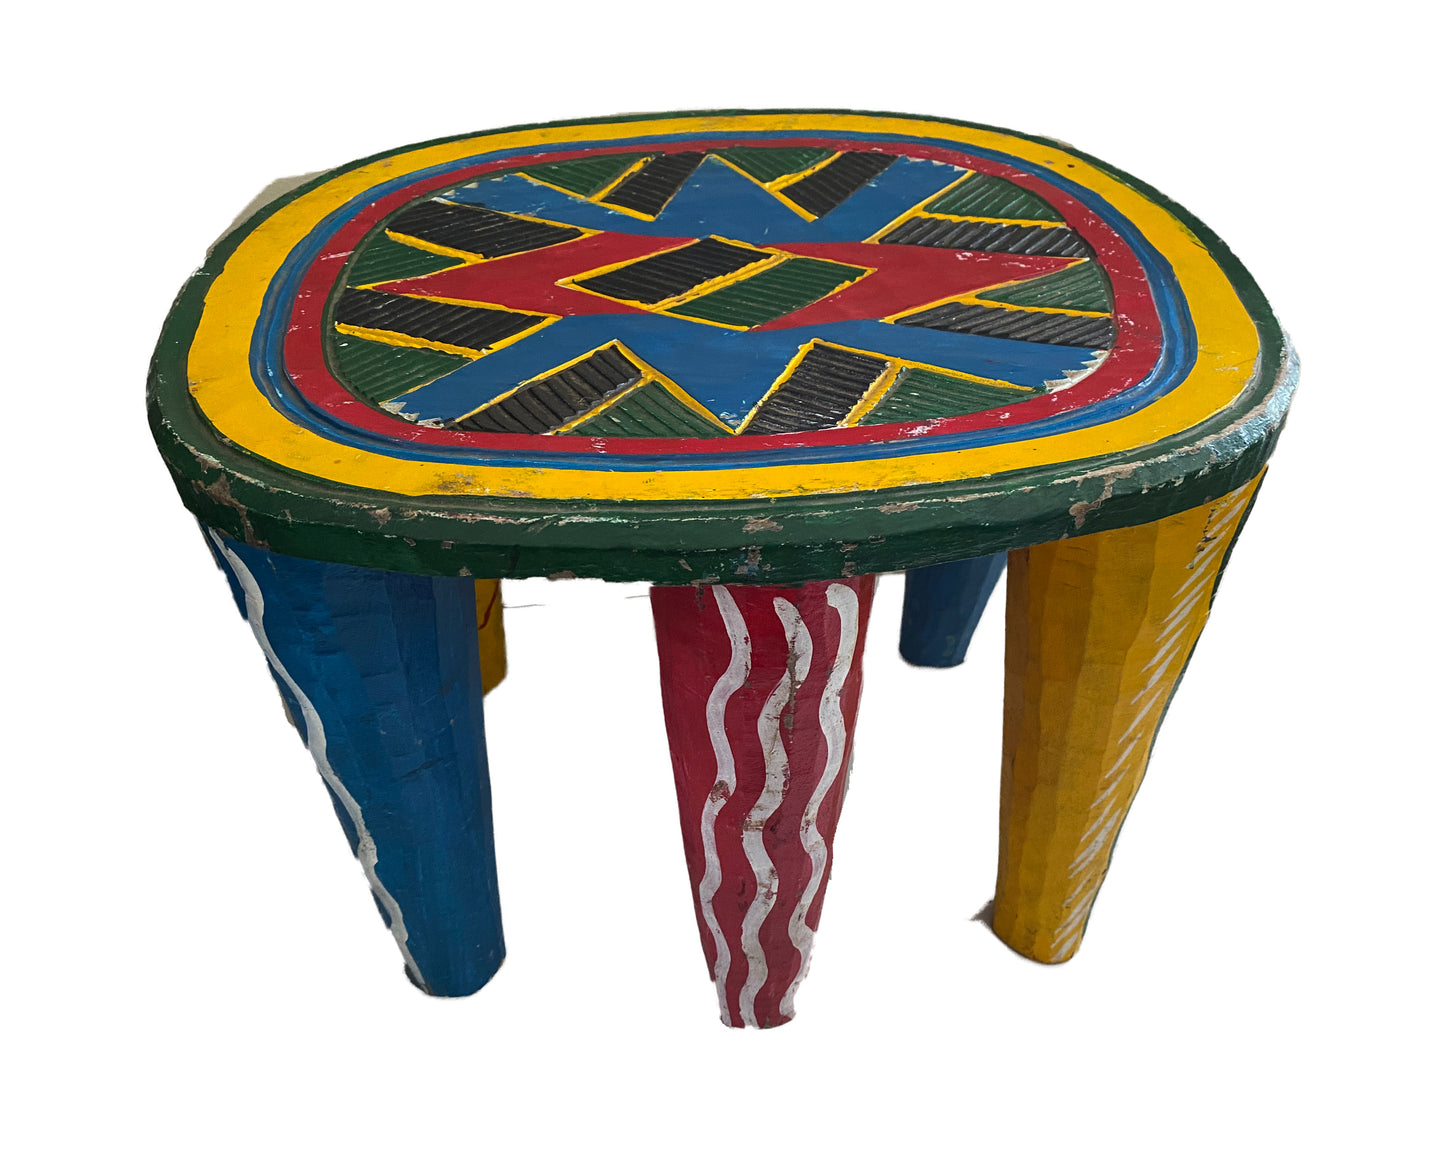 #3660 Superb African LG Colorful Nupe Stool Nigeria 11.75" h